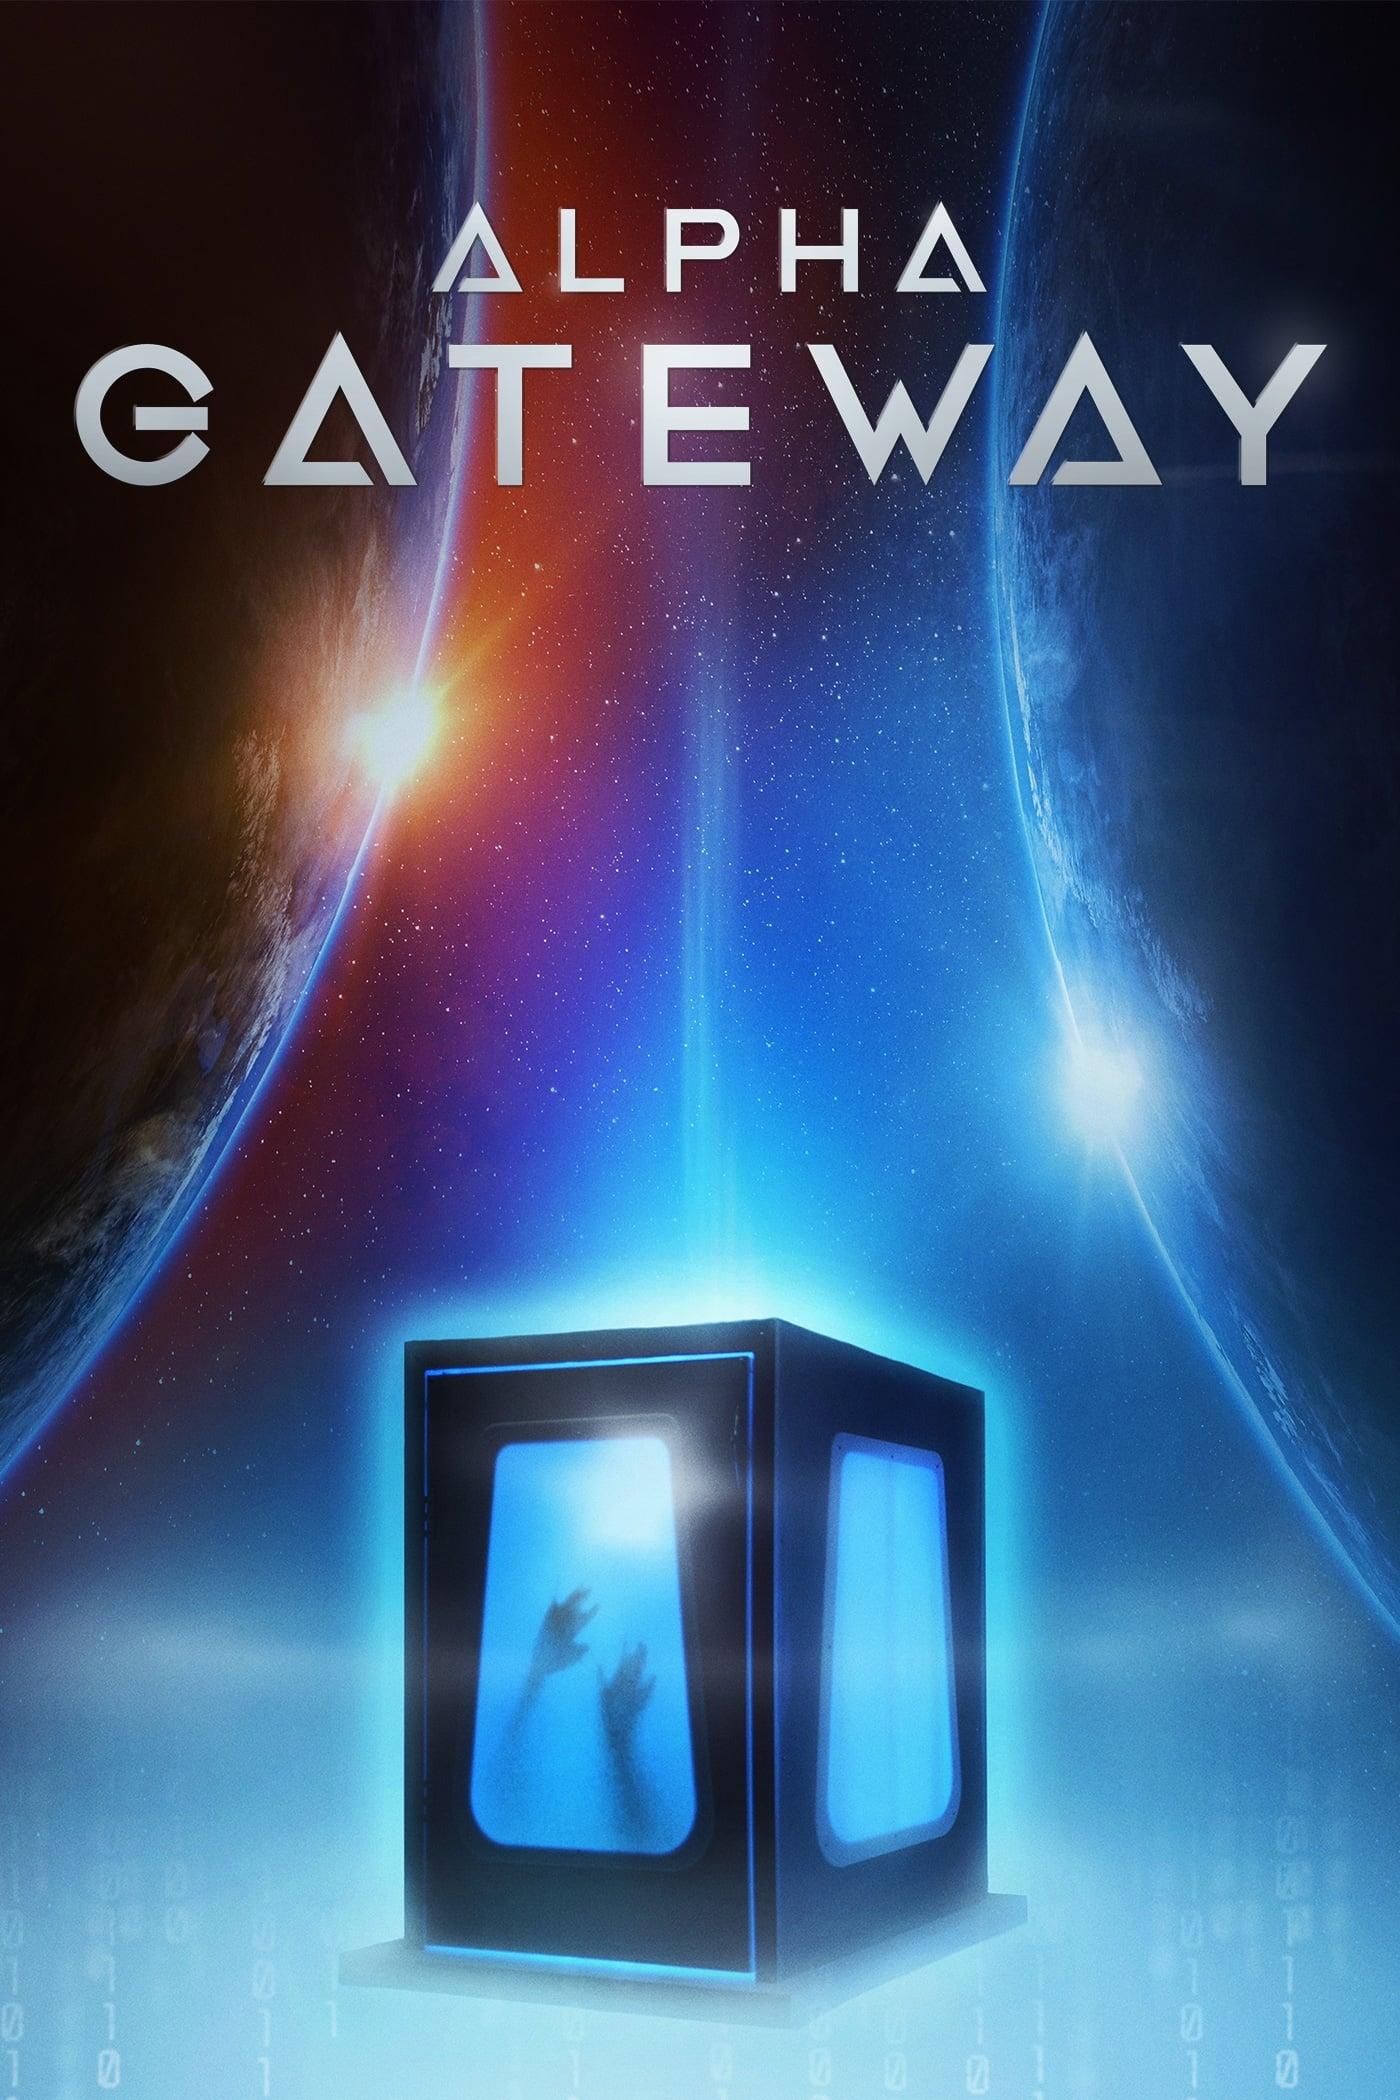 The Gateway poster